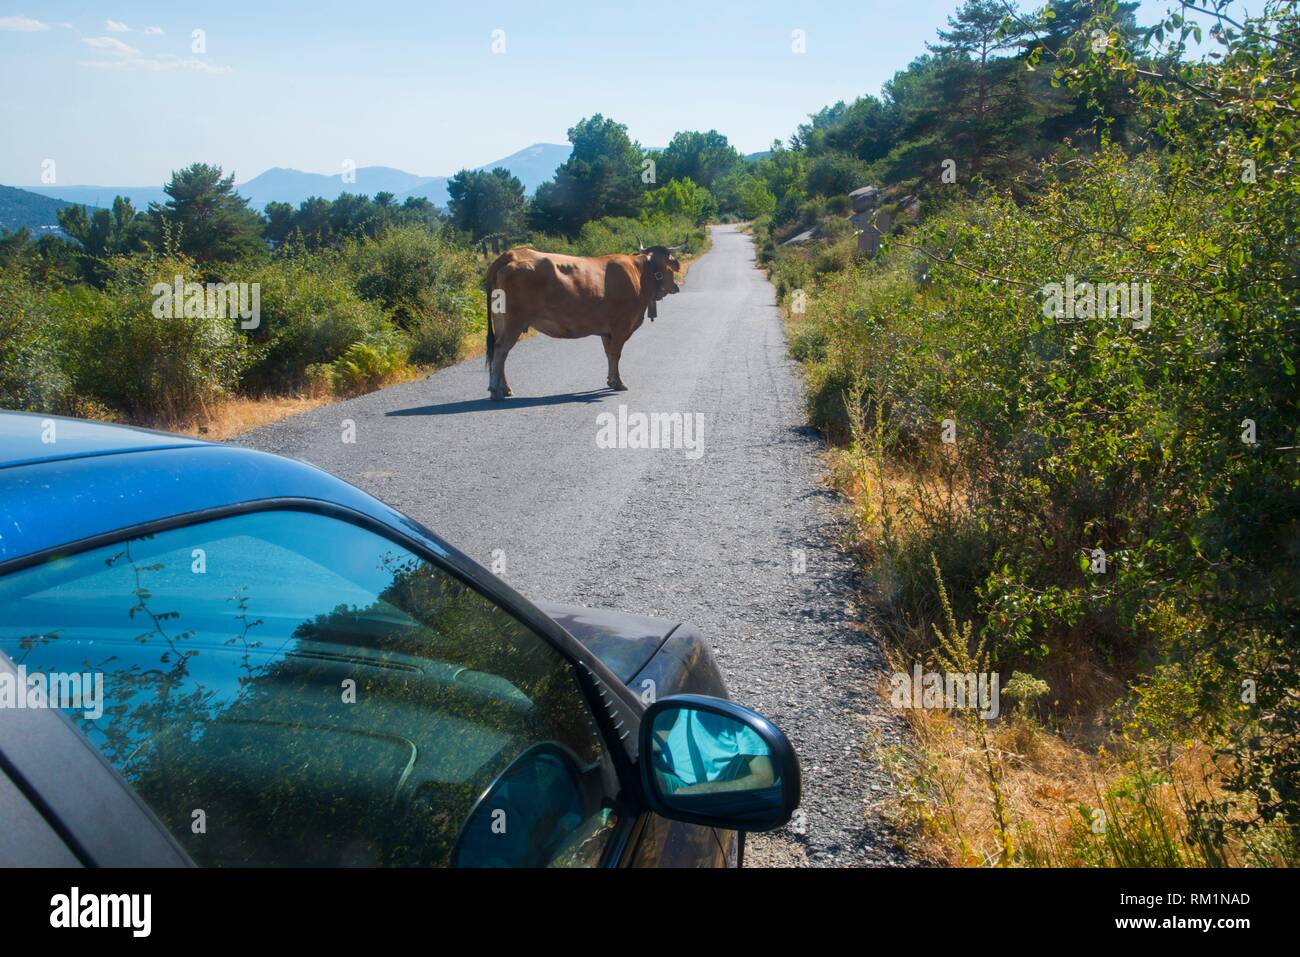 Cow in the middle of the road. Stock Photo